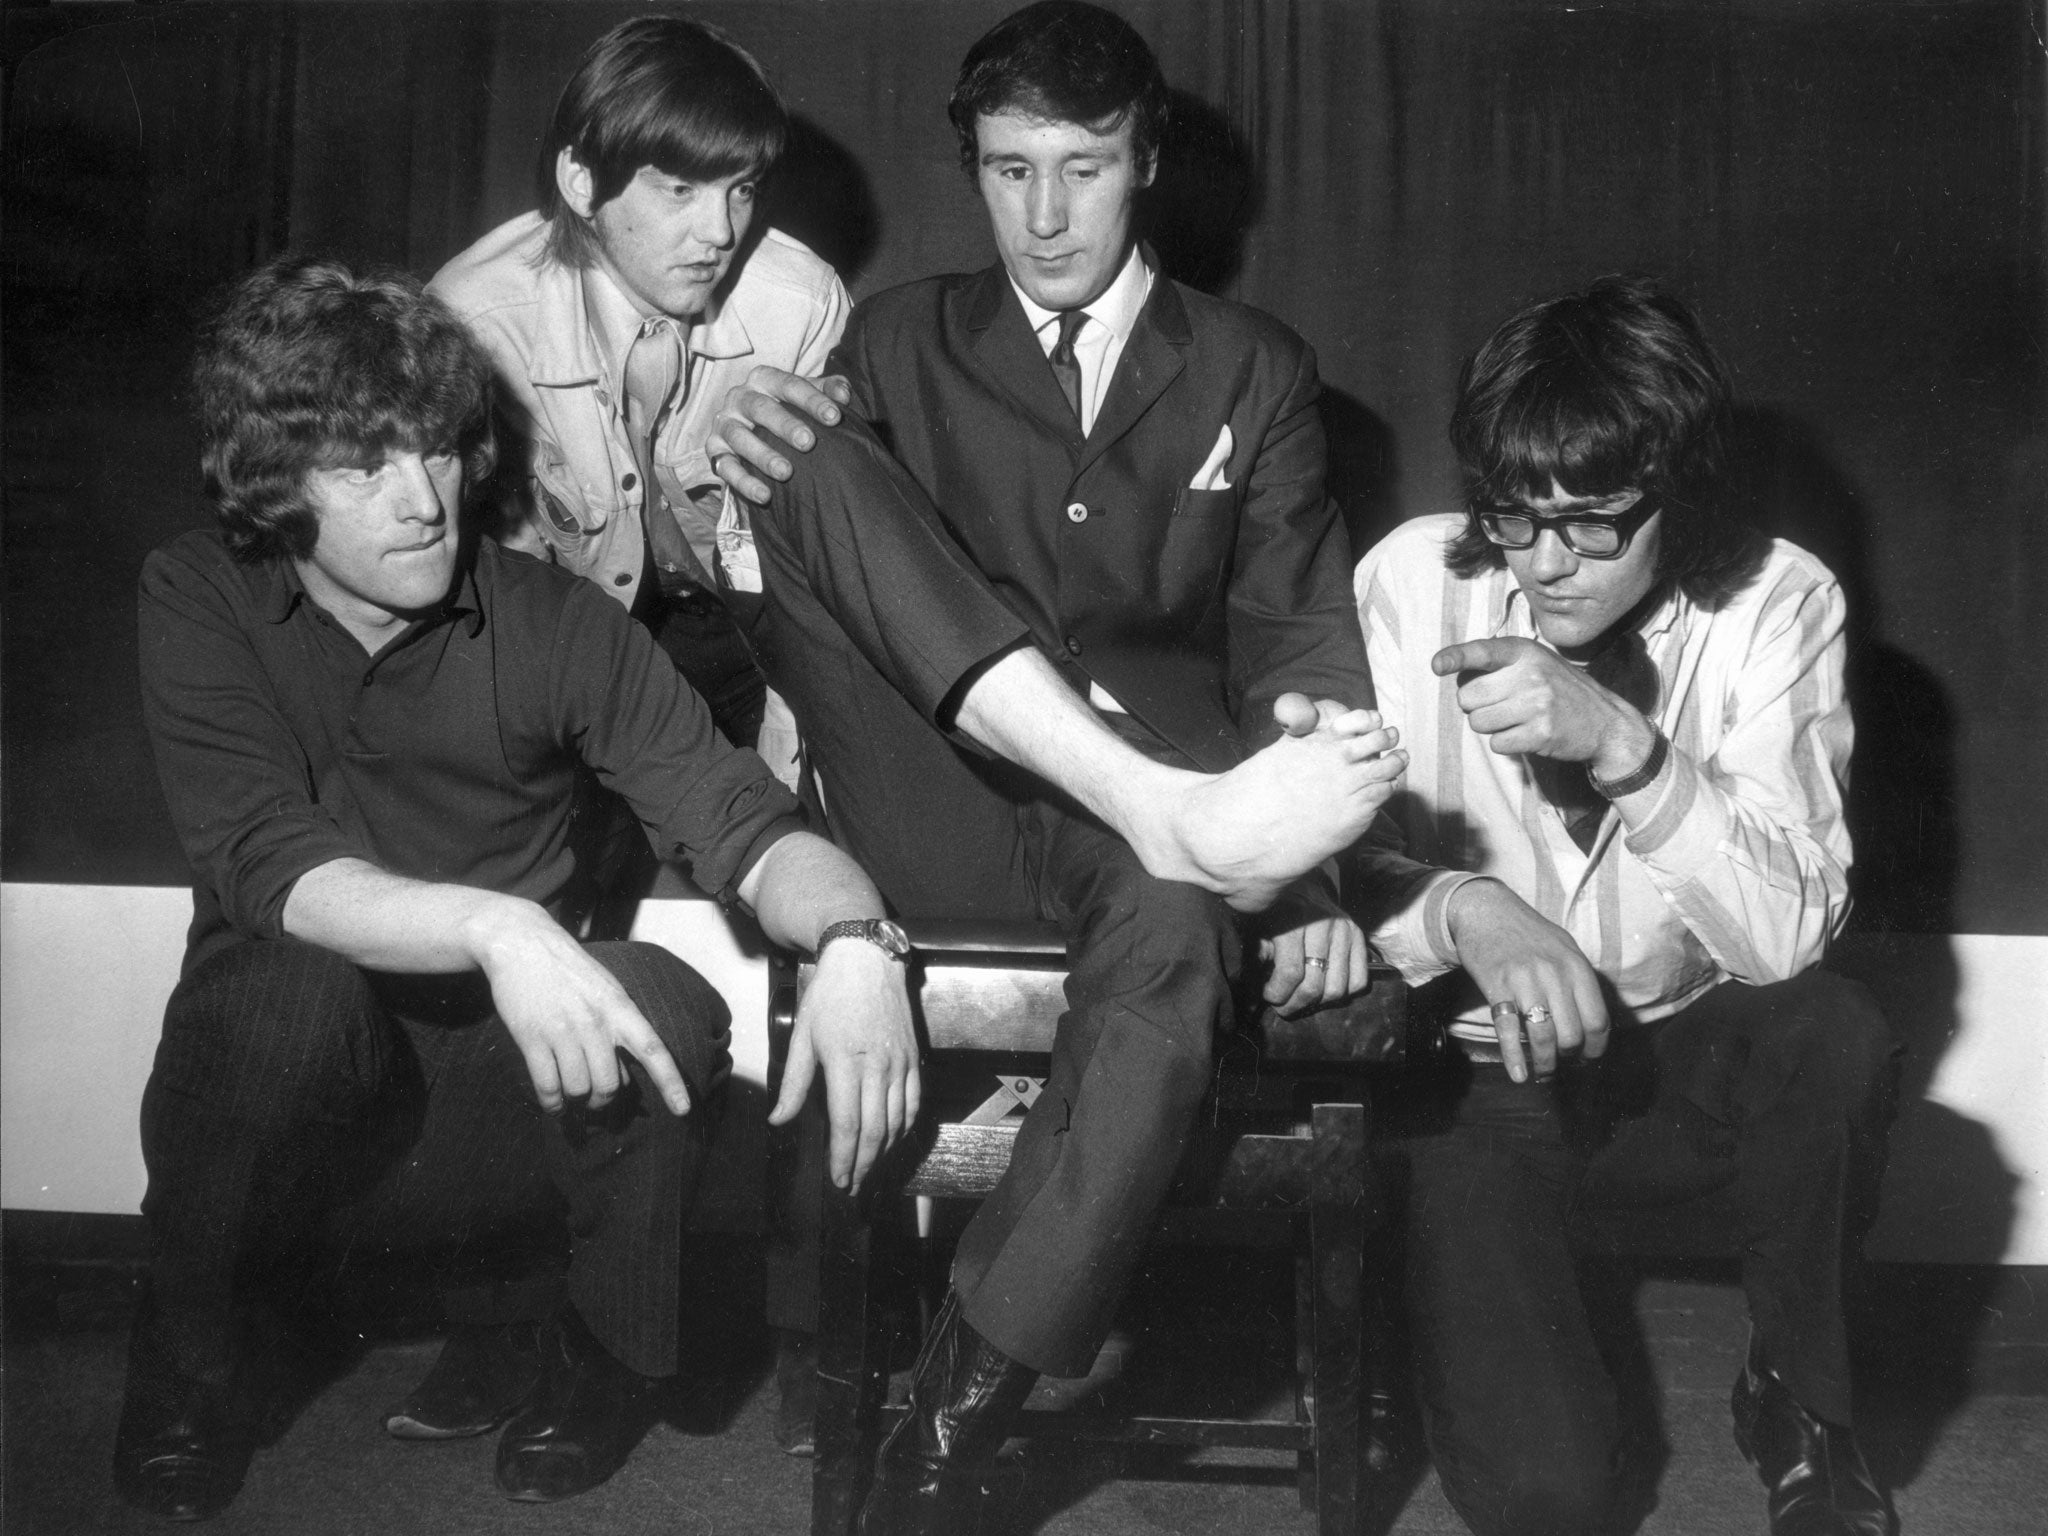 Lee's band in 1968, including Ian Hunter, far left, inspect the foot with which Lee played the piano